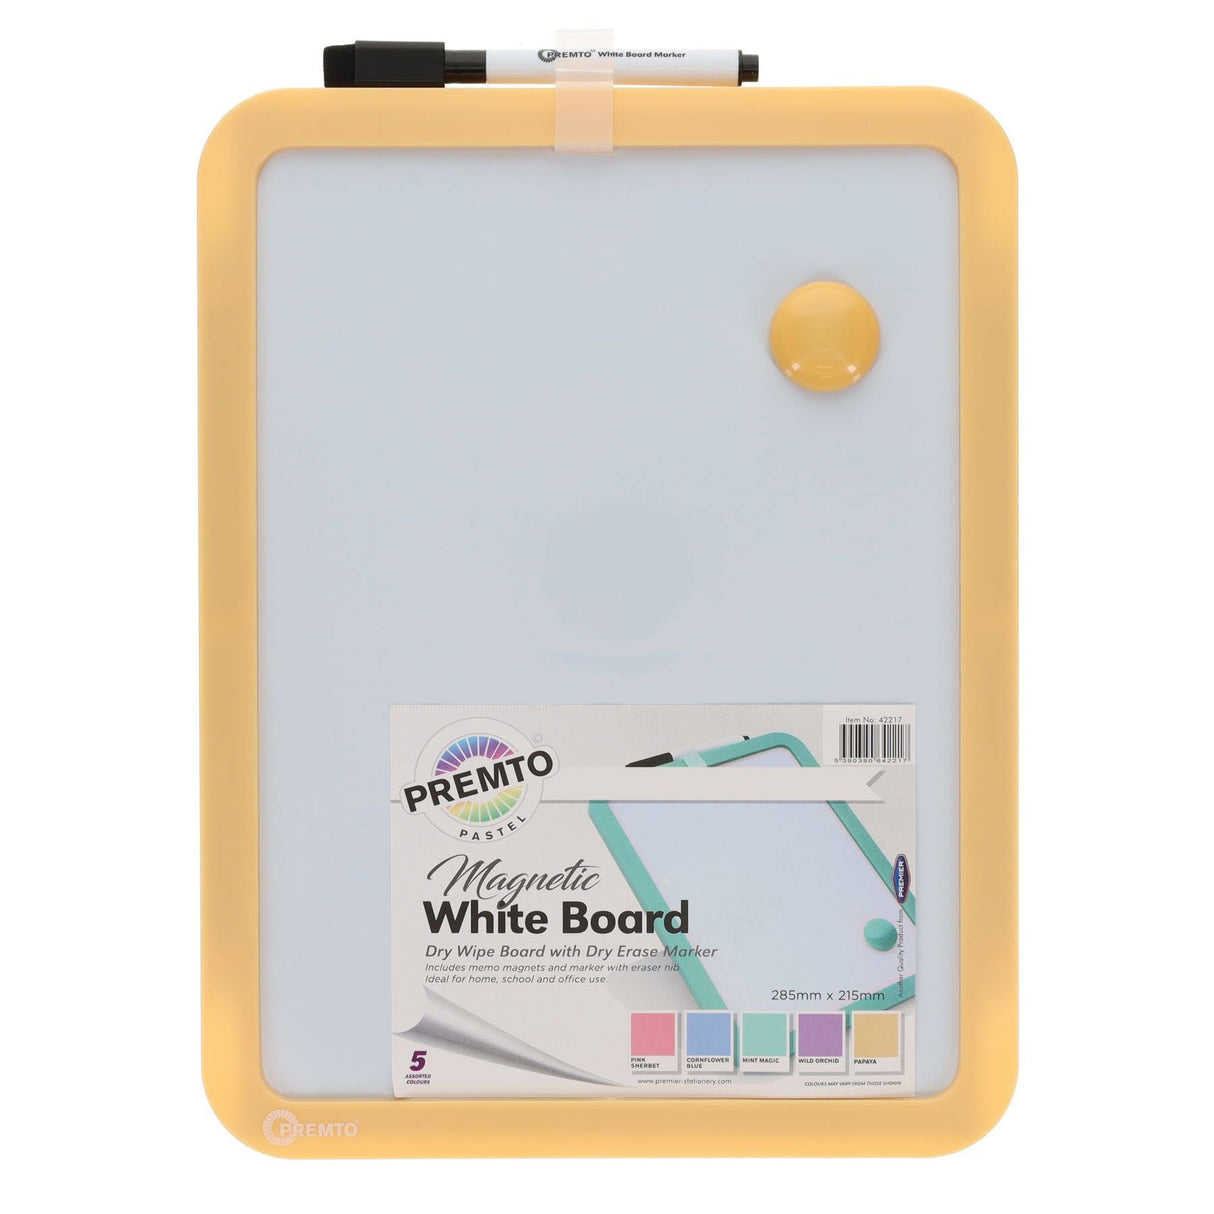 Premto Magnetic White Board With Dry Wipe Marker - Papaya - 285x215mm-Whiteboards-Premto|StationeryShop.co.uk